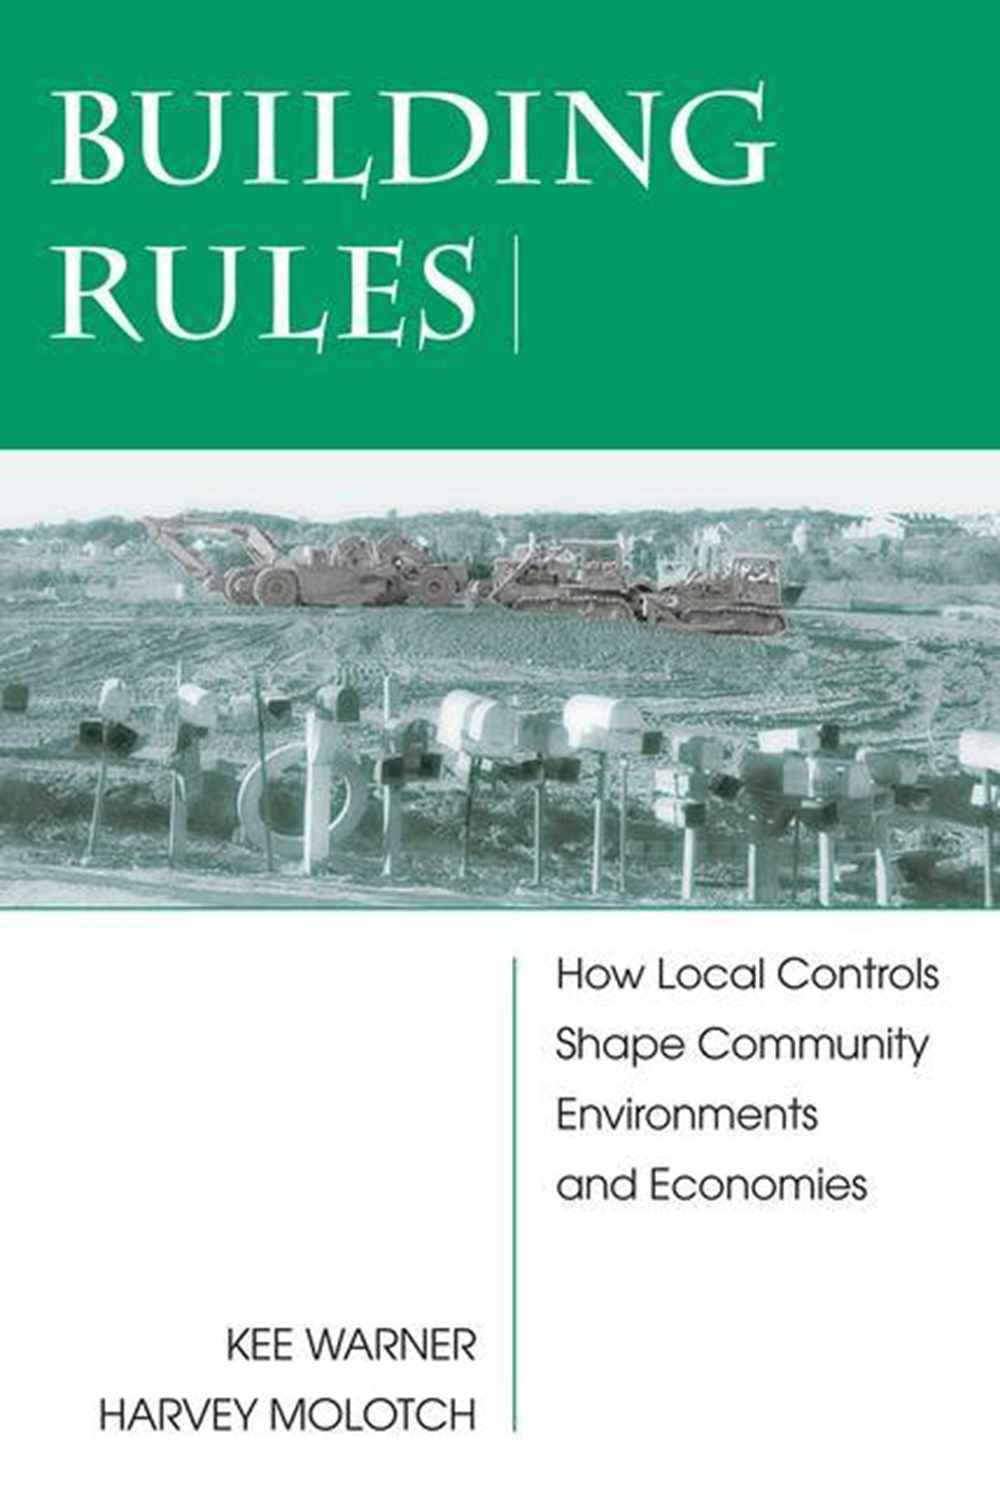 Building Rules How Local Controls Shape Community Environments and Economies